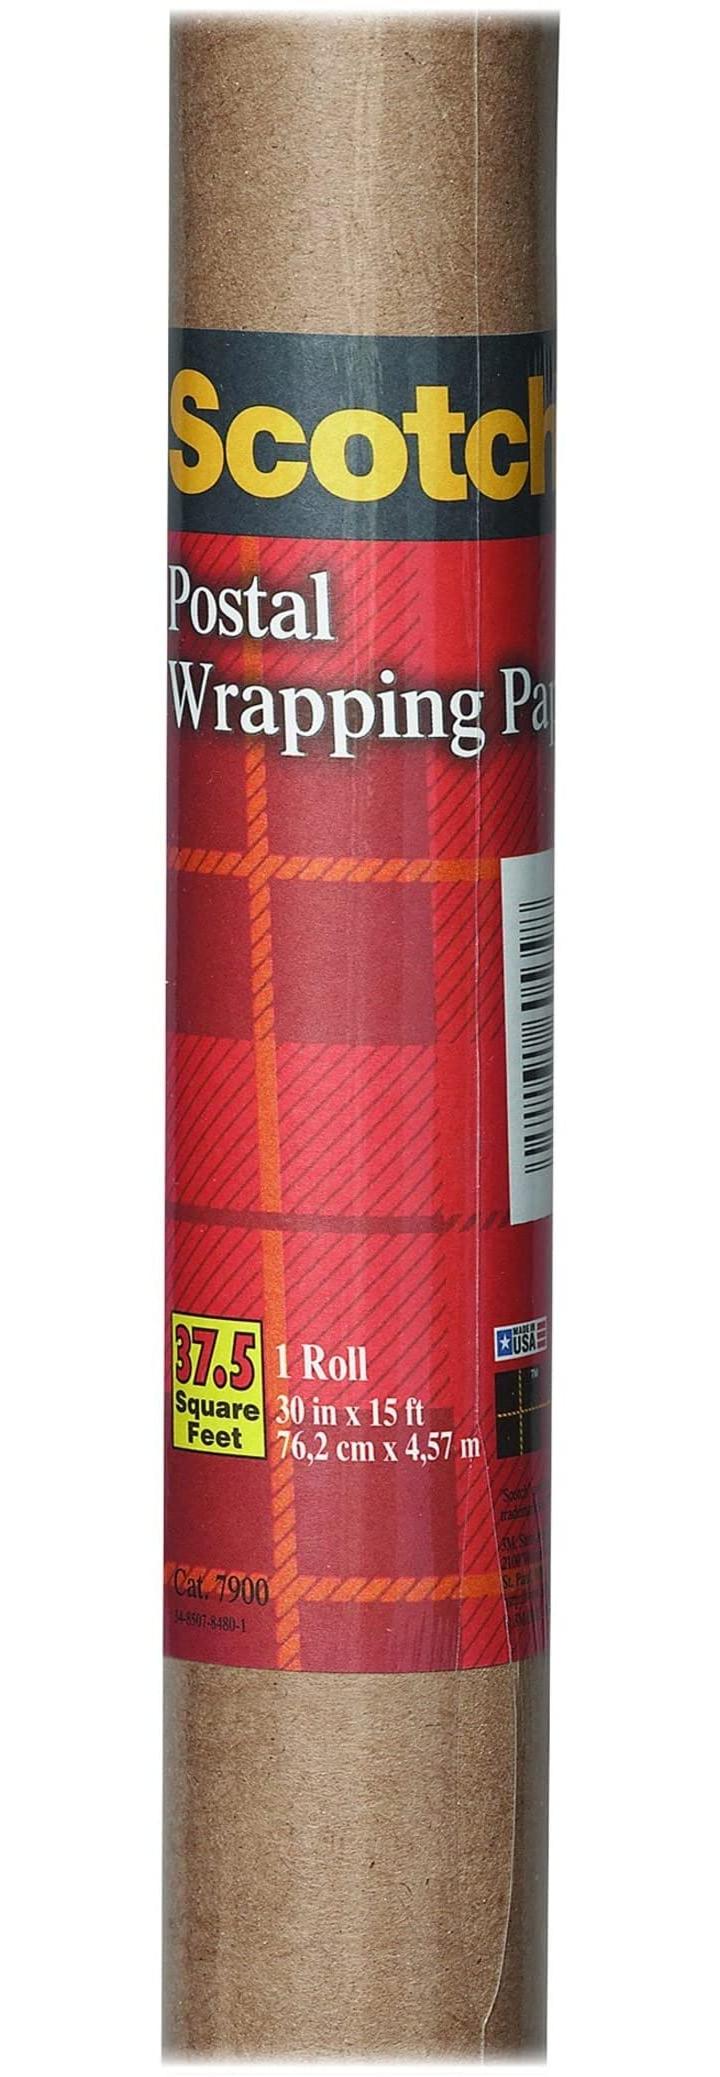 Paper Postal Wrapping 2.5x15ft